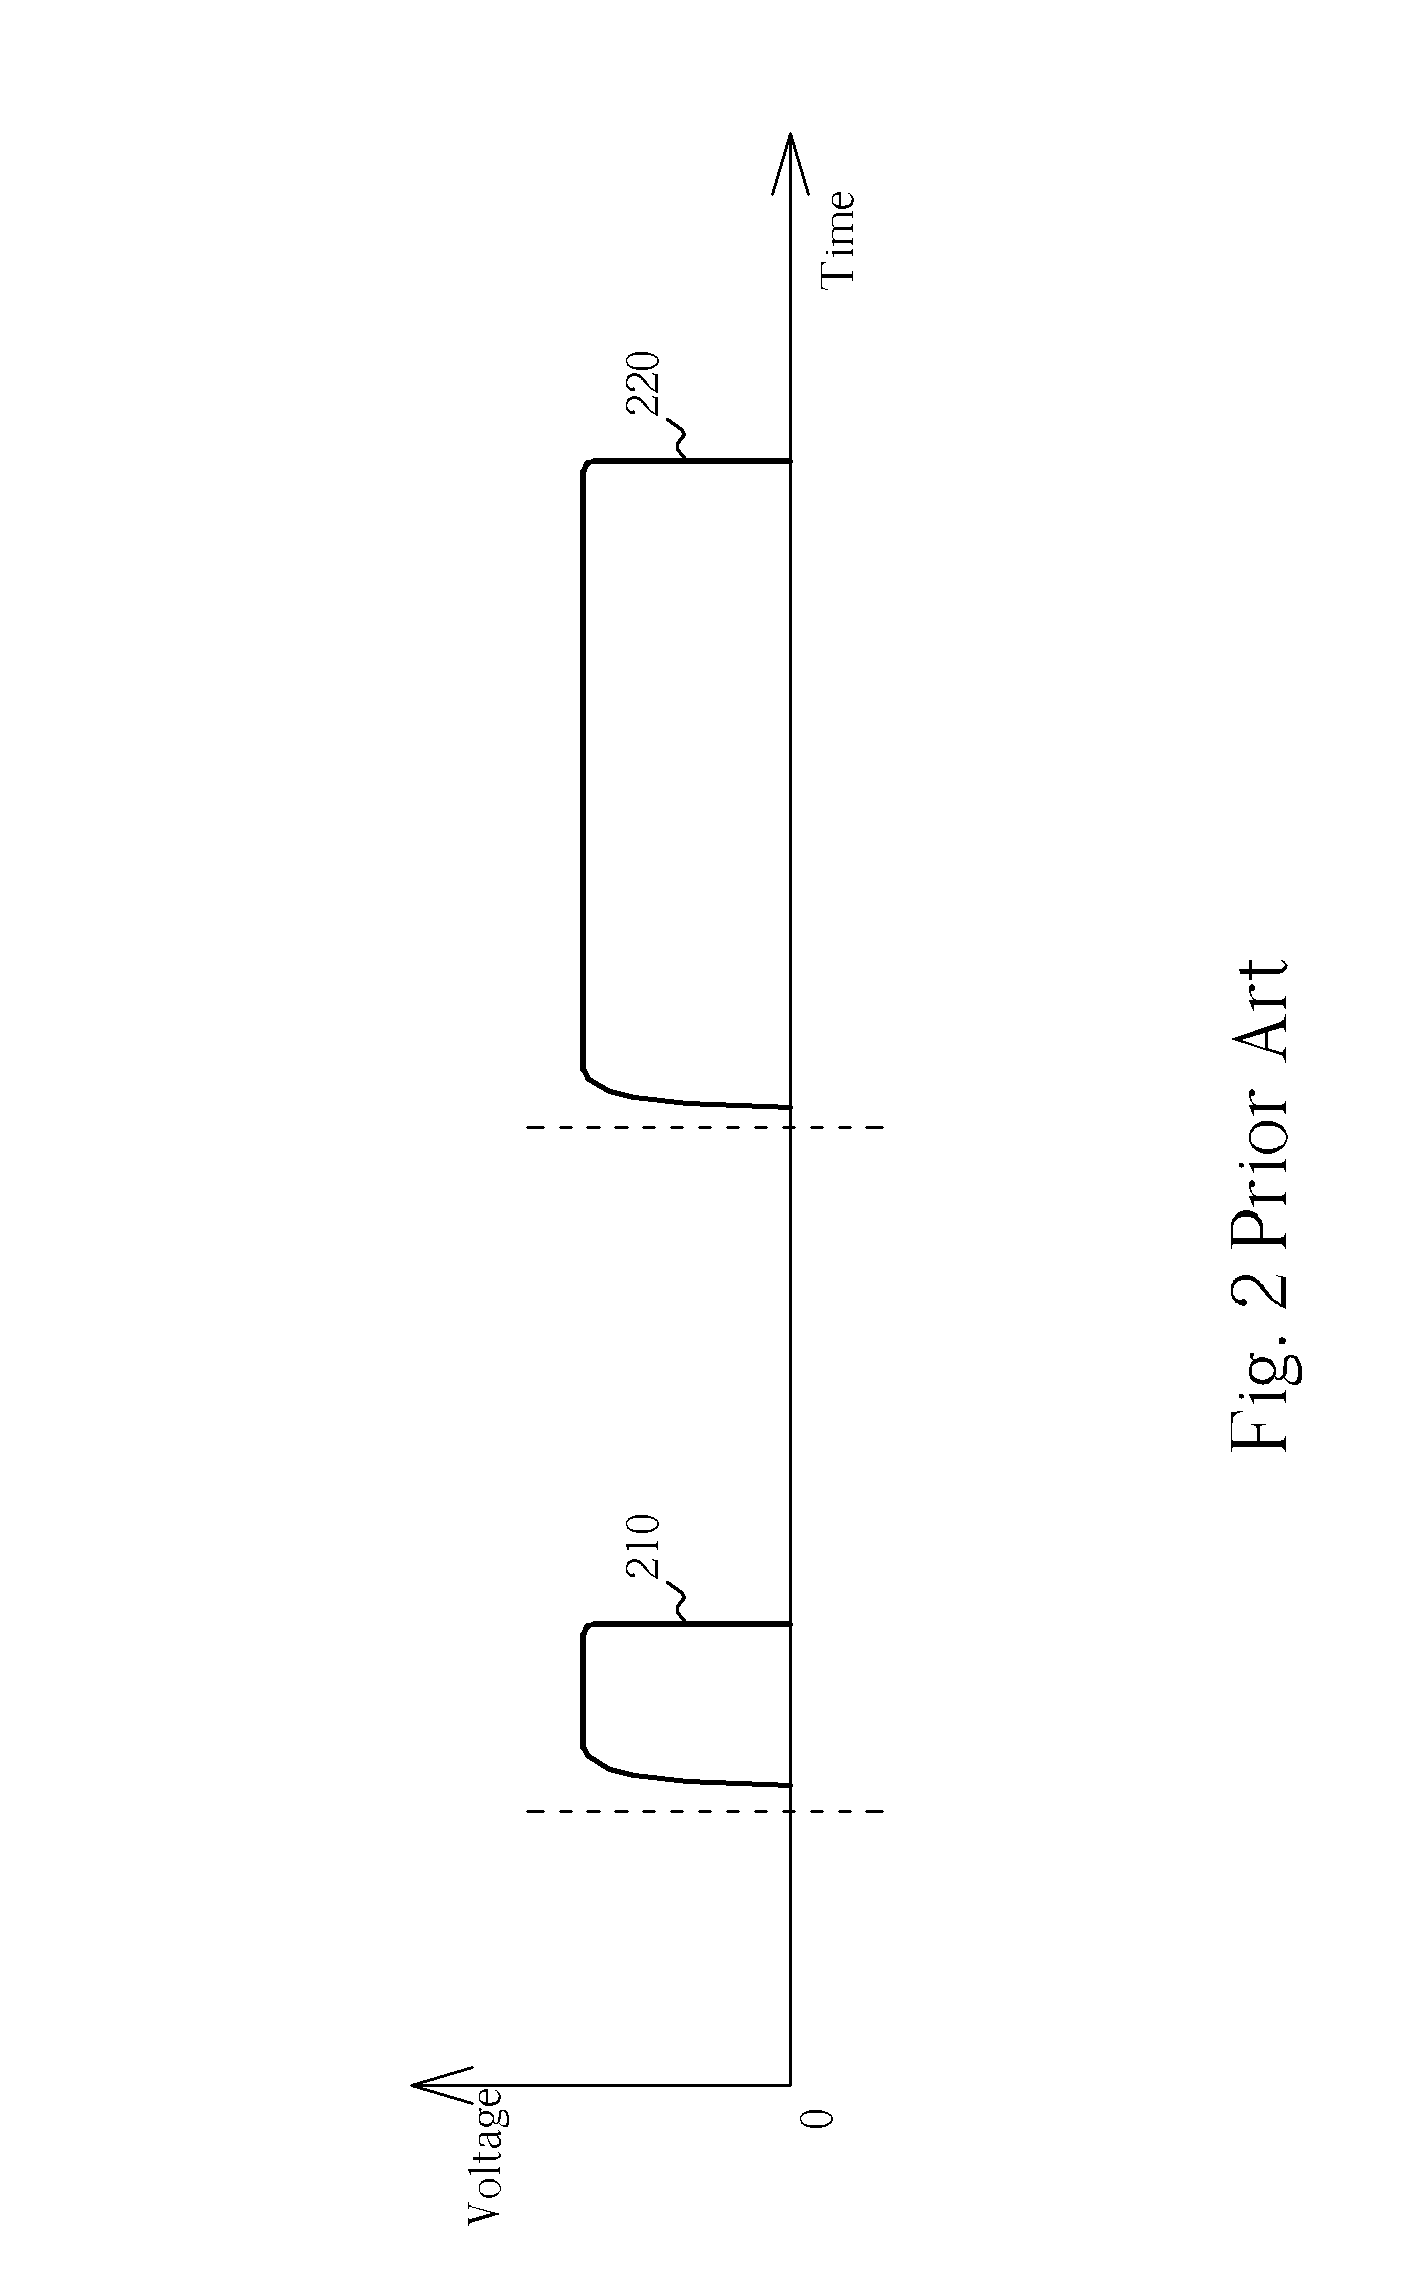 Driving method of dual-scan mode display and related display thereof